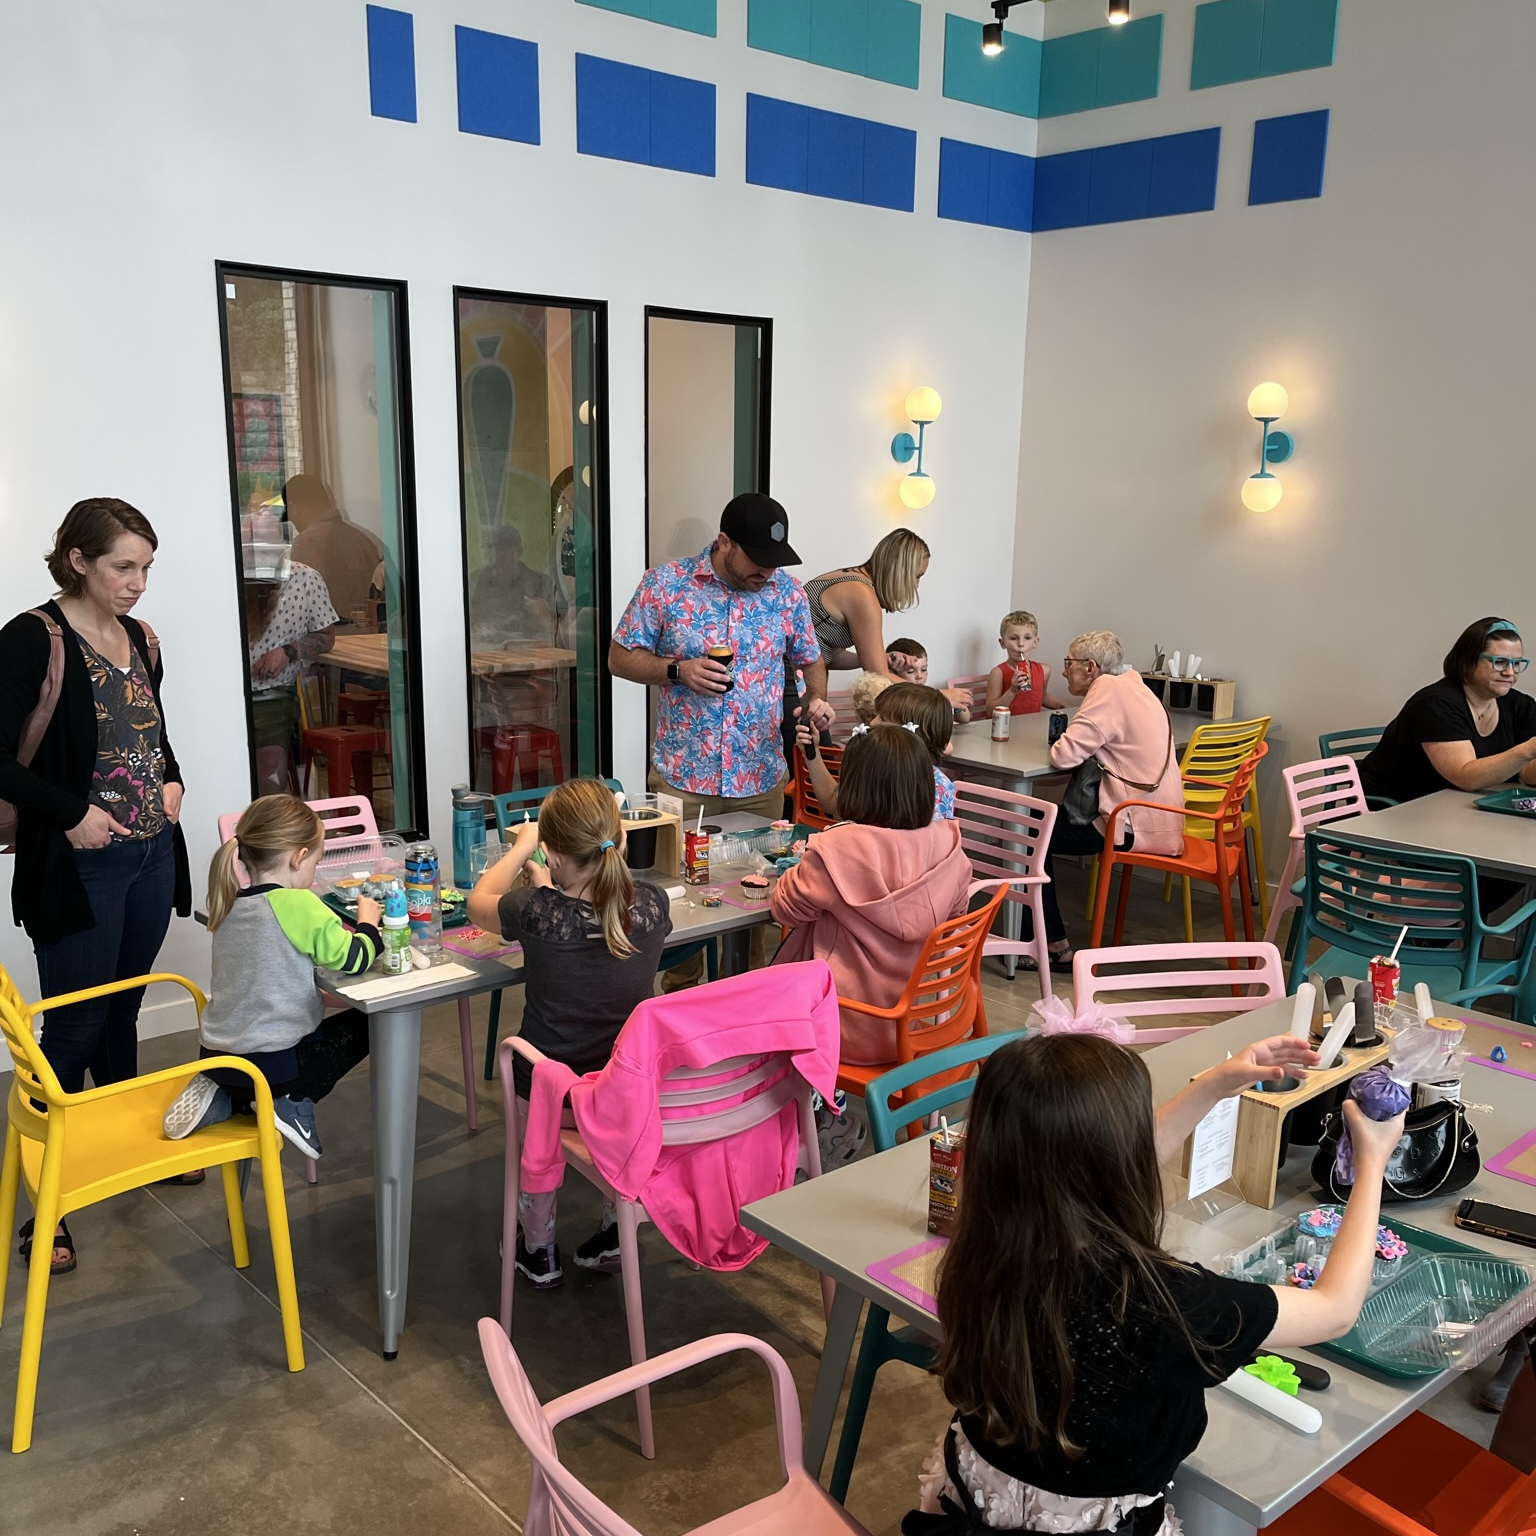 four tables are full of adults and children decorating cupcakes and having a good time. Some adults are drinking beer and wine, and kids are drinking chocolate milks